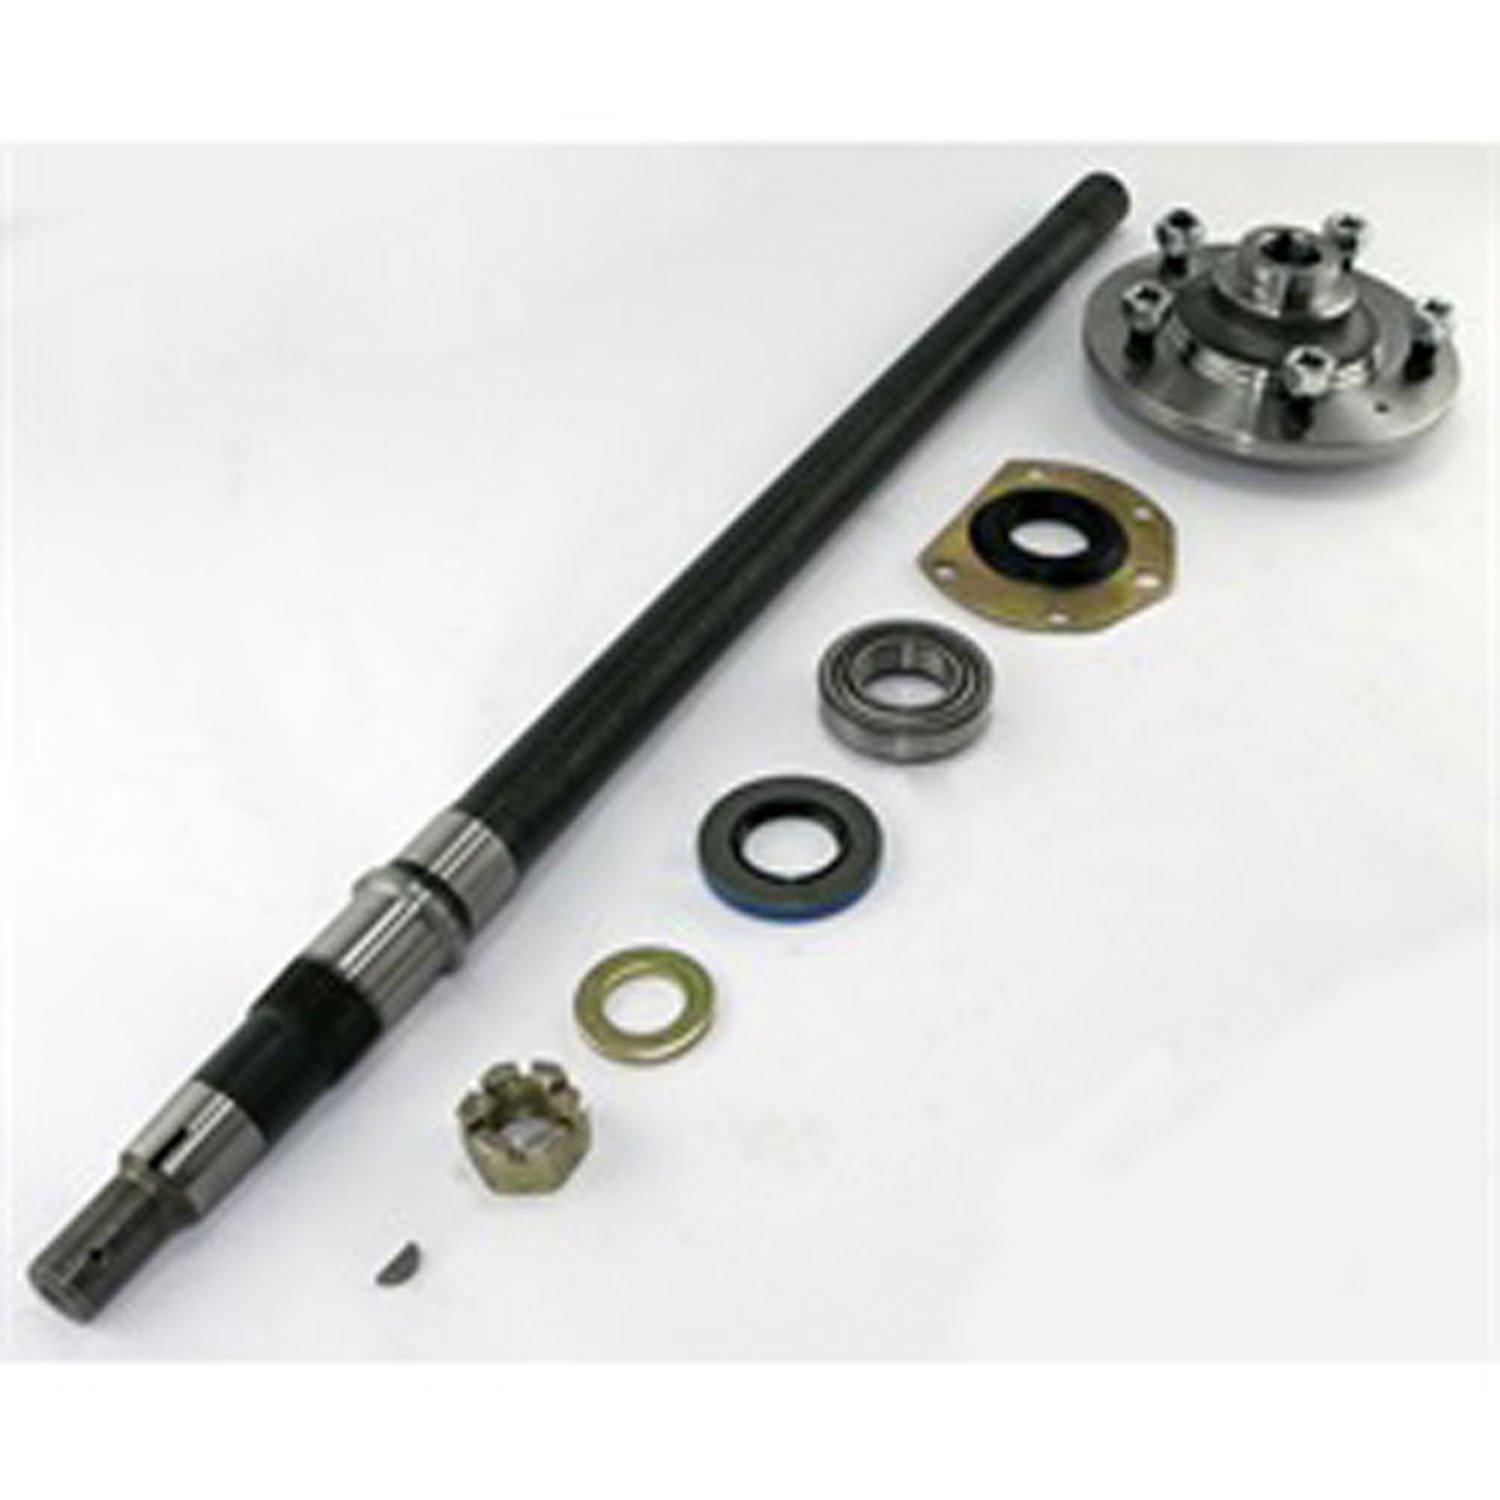 Axle Shaft Kit AMC20 Narrow Track RH 29.25 inch Includes Axle Hub Bearing Cup Inner/Outer Seal Nut W